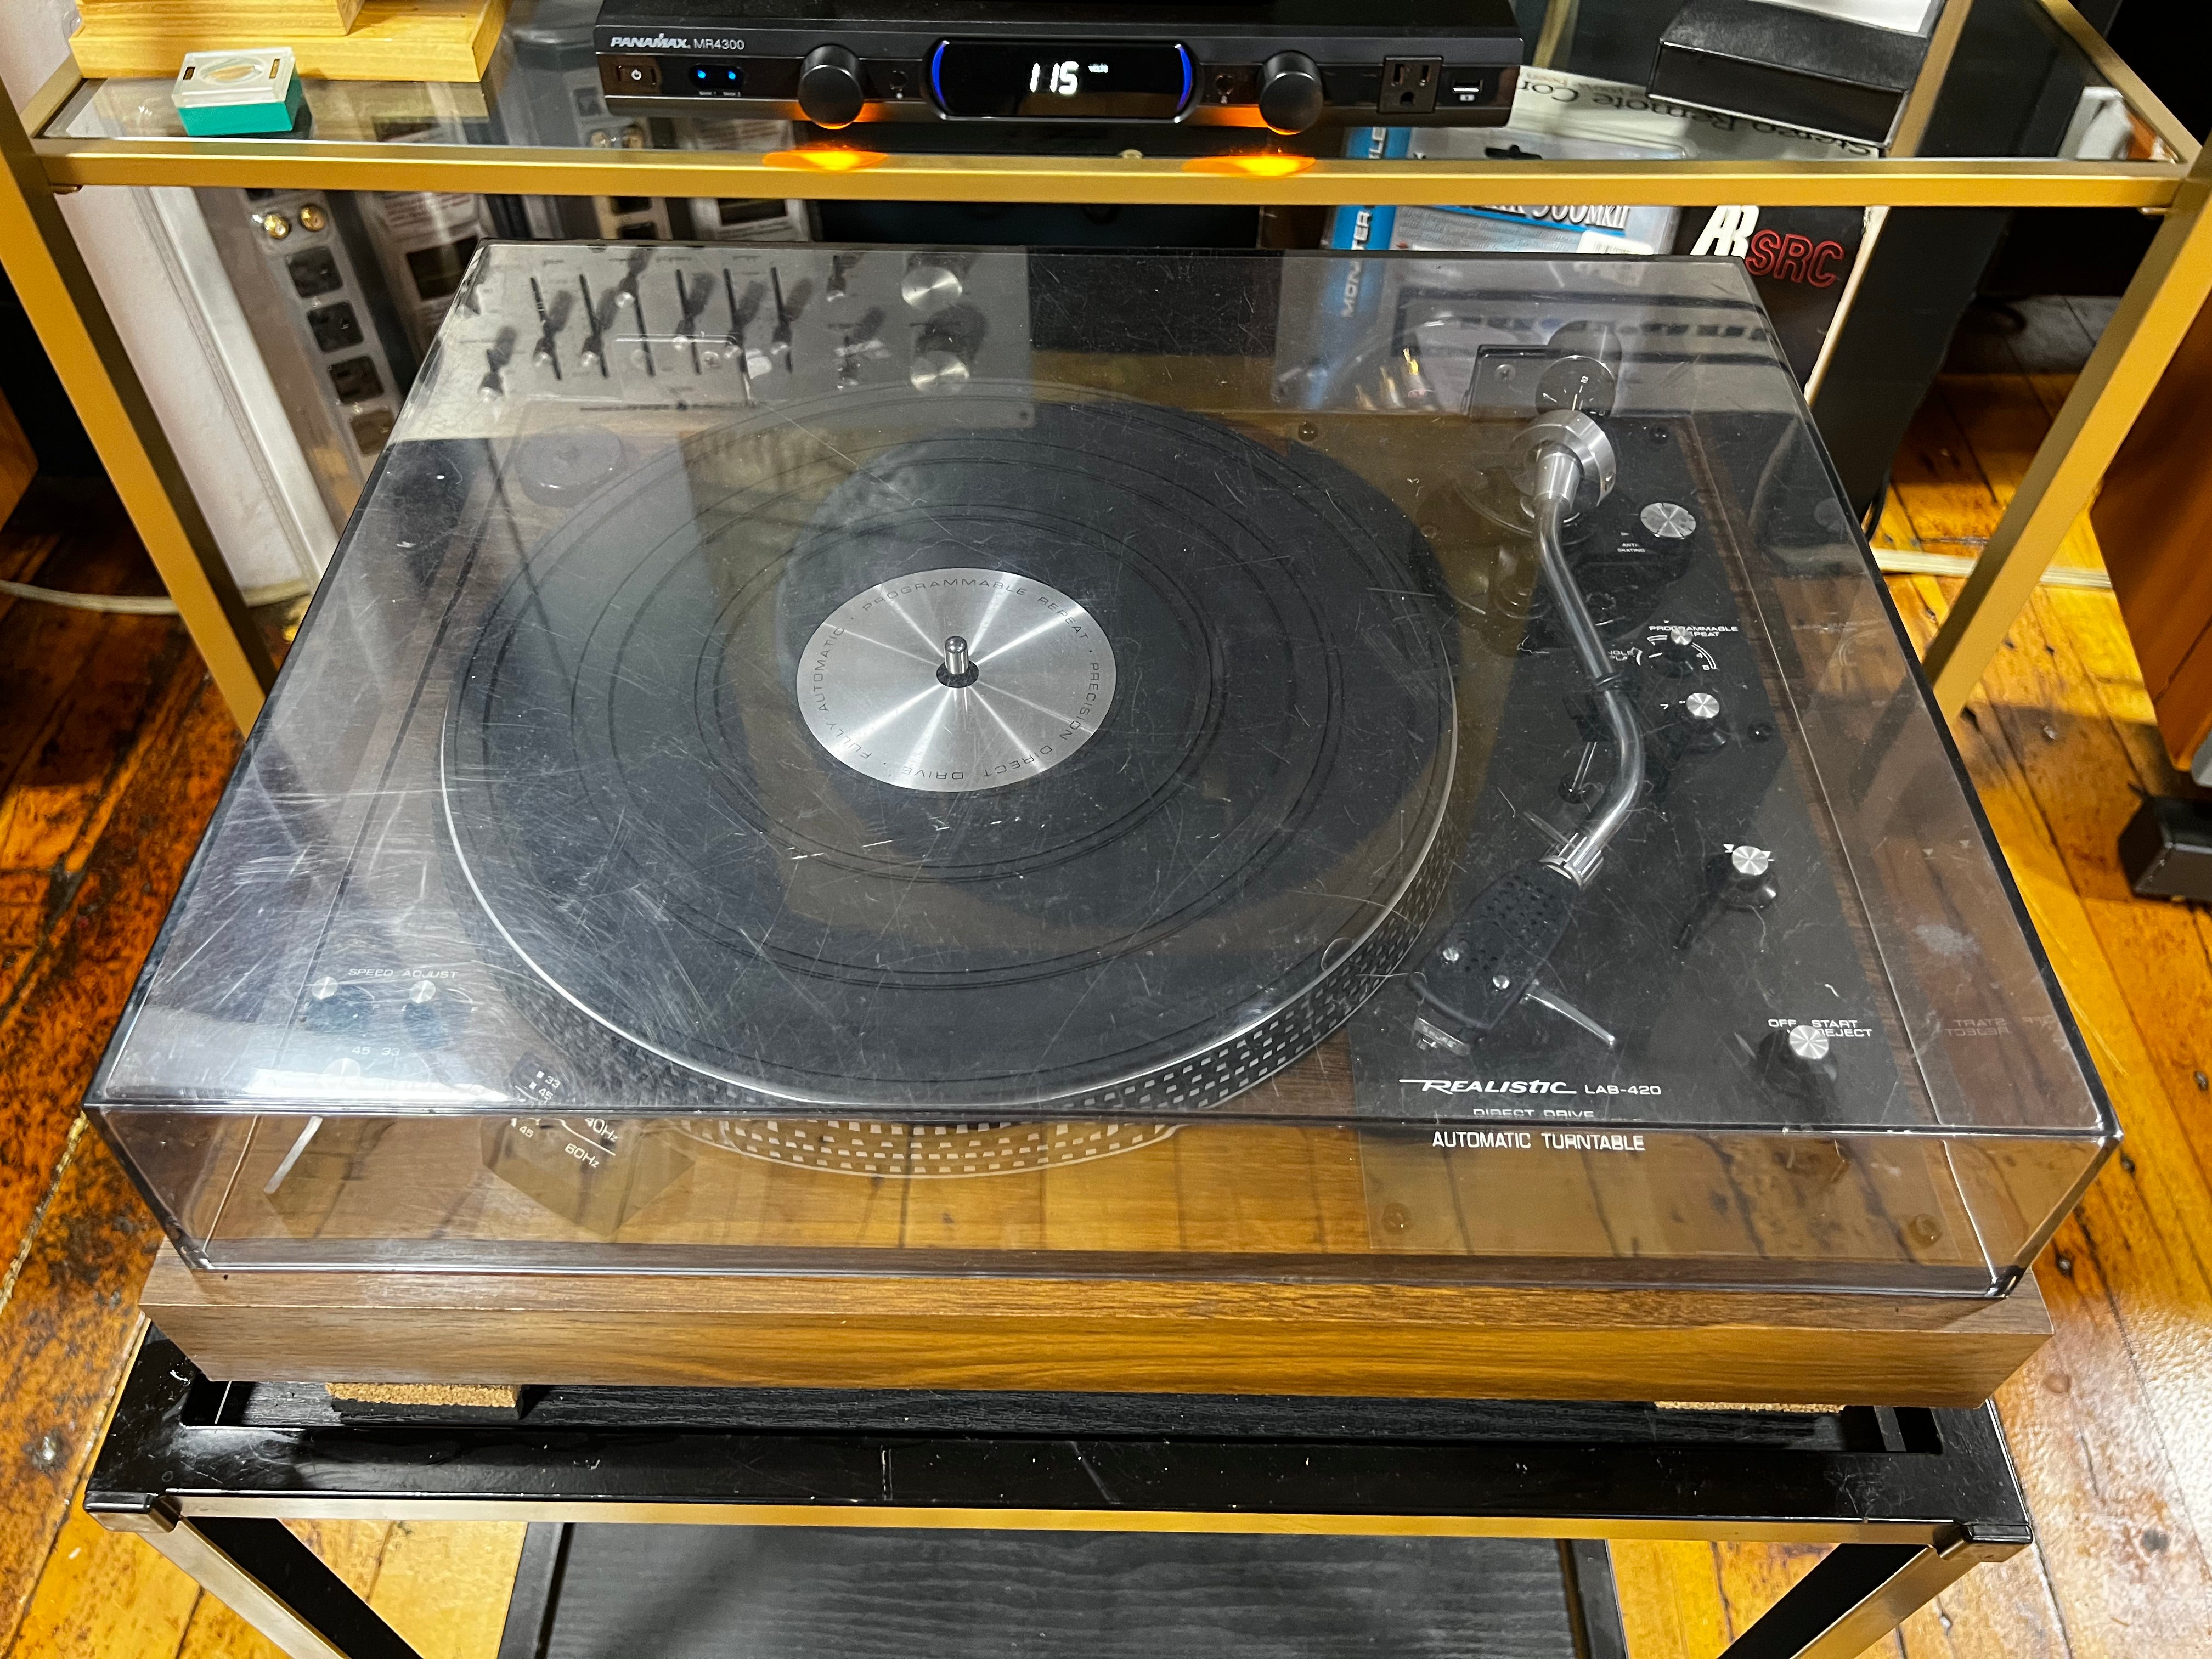 Realistic LAB-420 Turntable, Shure V15 RS Cart